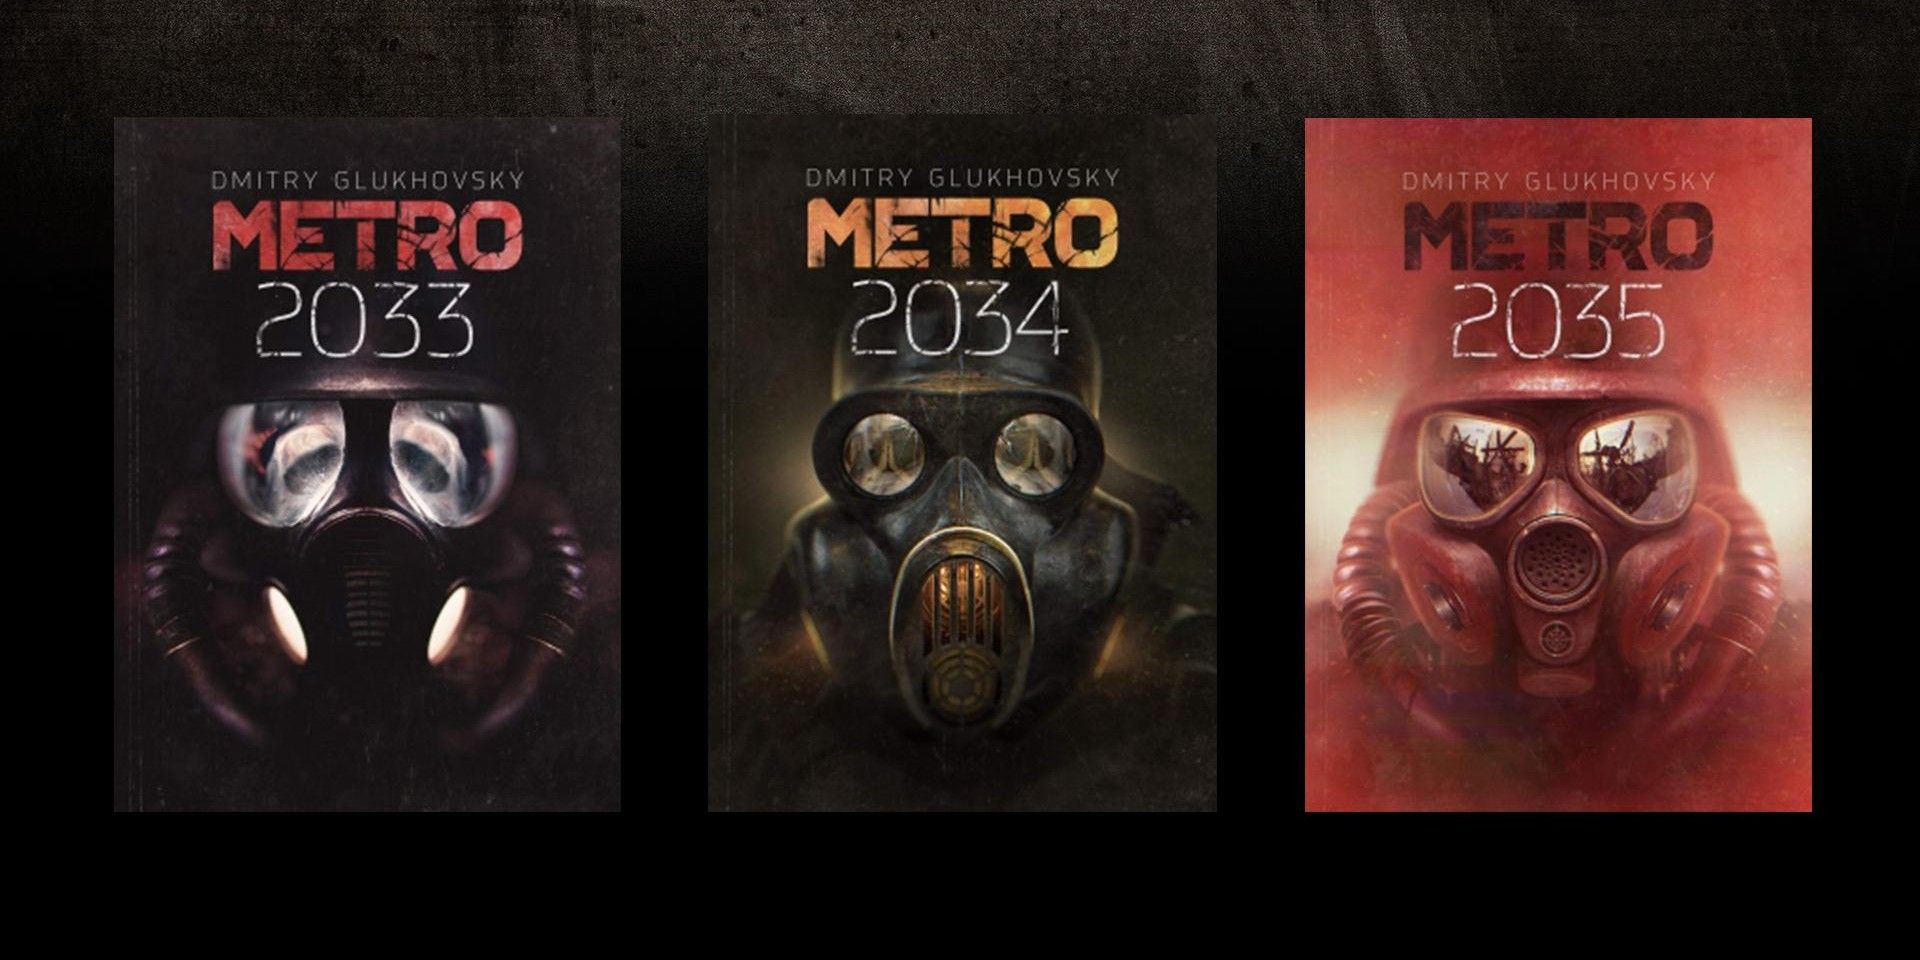 Metro 2033 World Explained: What The Metro Books Are About